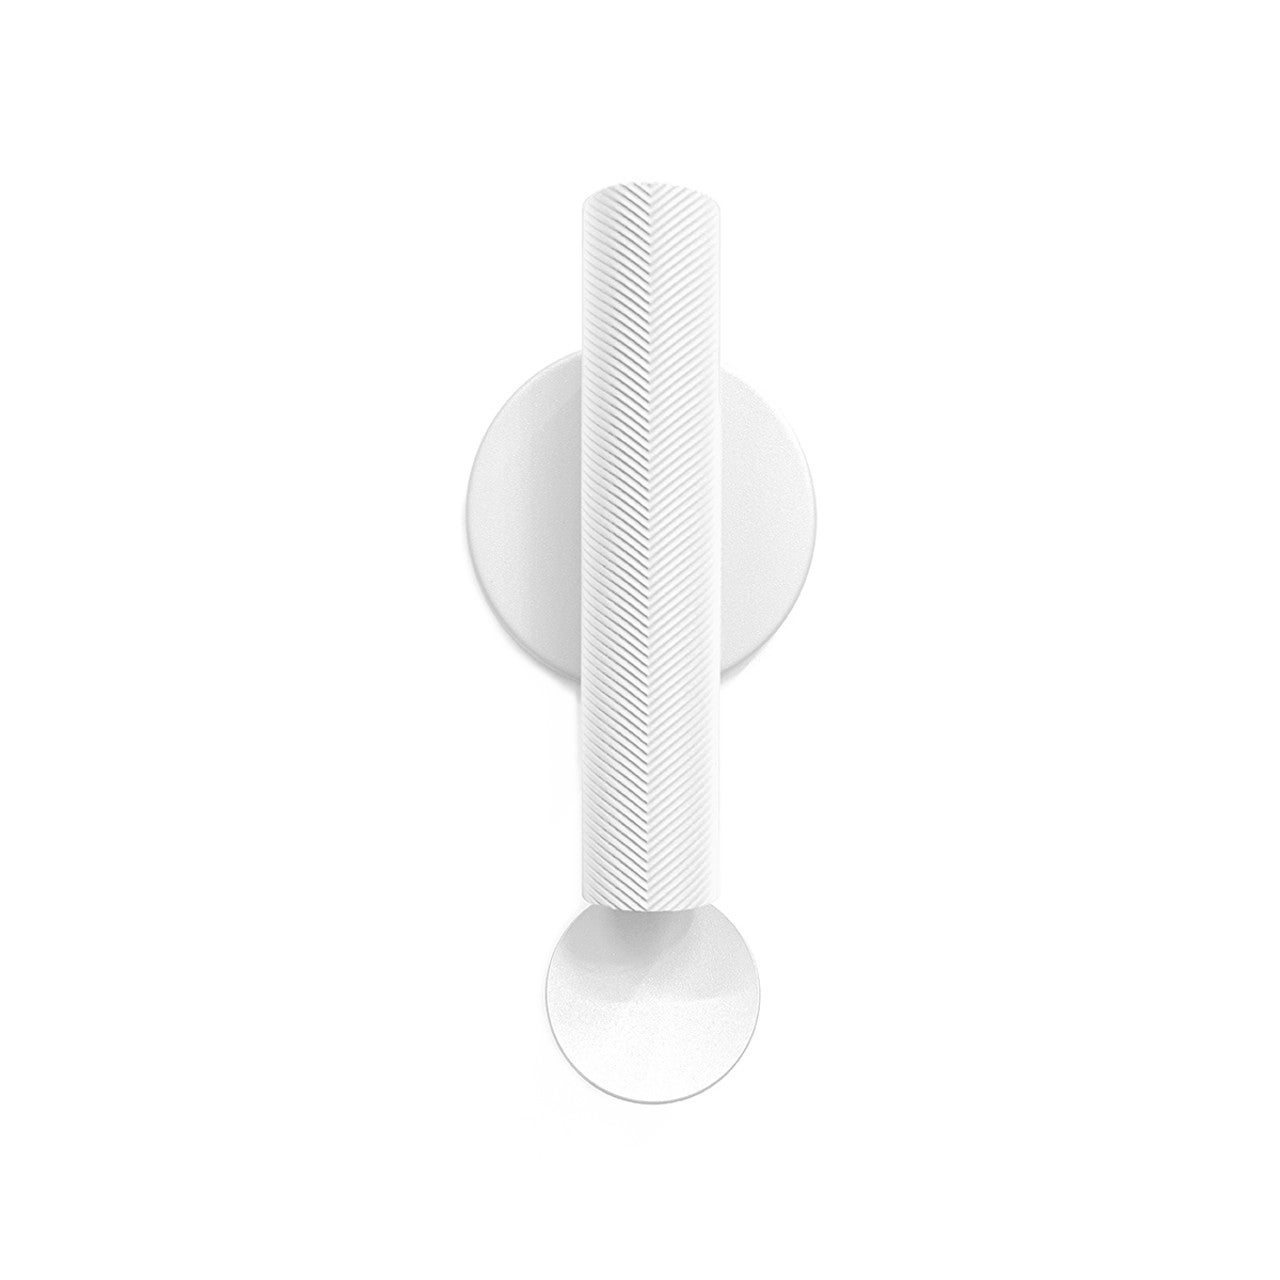 Flos Flauta Spiga Small Indoor/Outdoor Wall Sconce in White by Patricia Urquiola For Sale